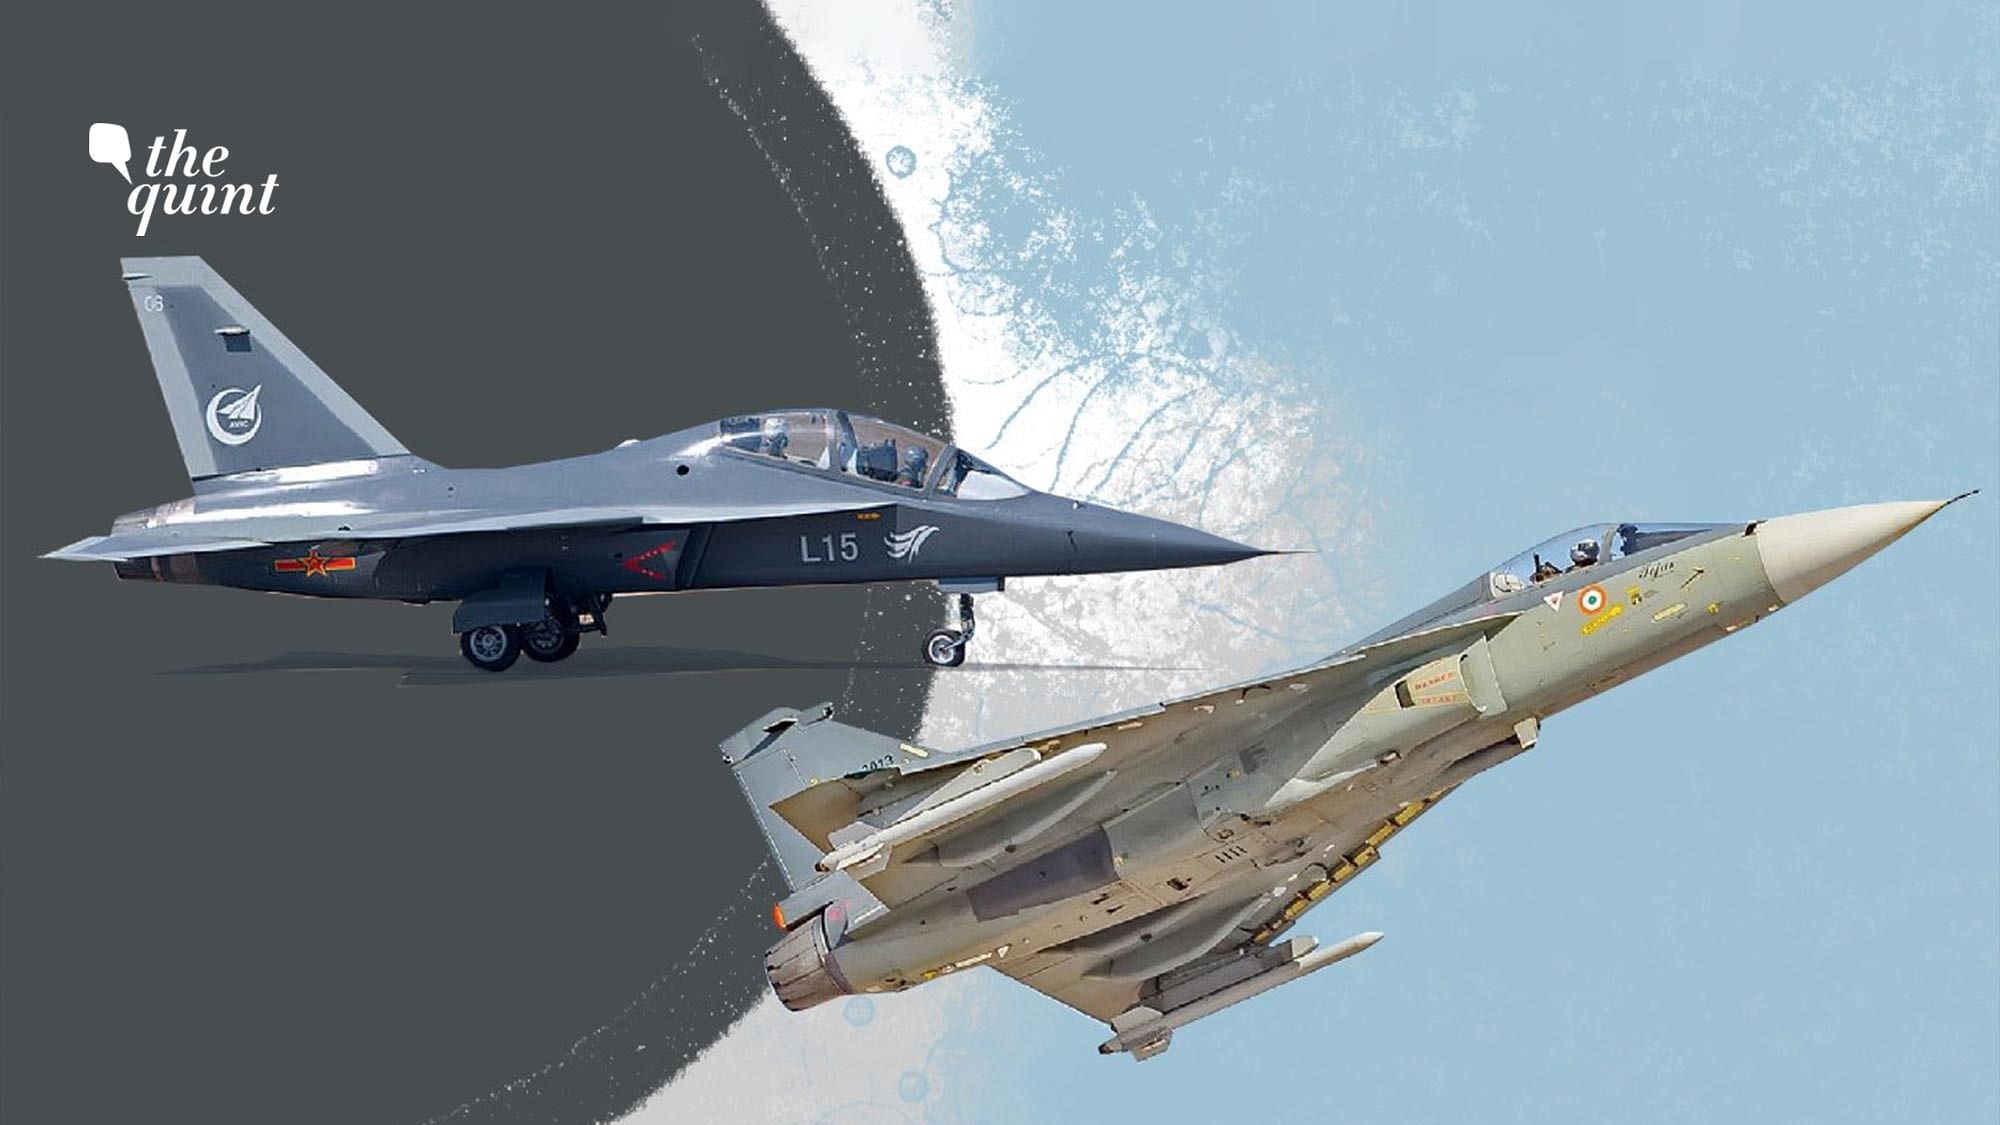 Images of China’s PLAAF’s Hongdu L-15 aircraft (L) and the Indian Air Force’s Tejas aircraft (R) used for representational purposes.